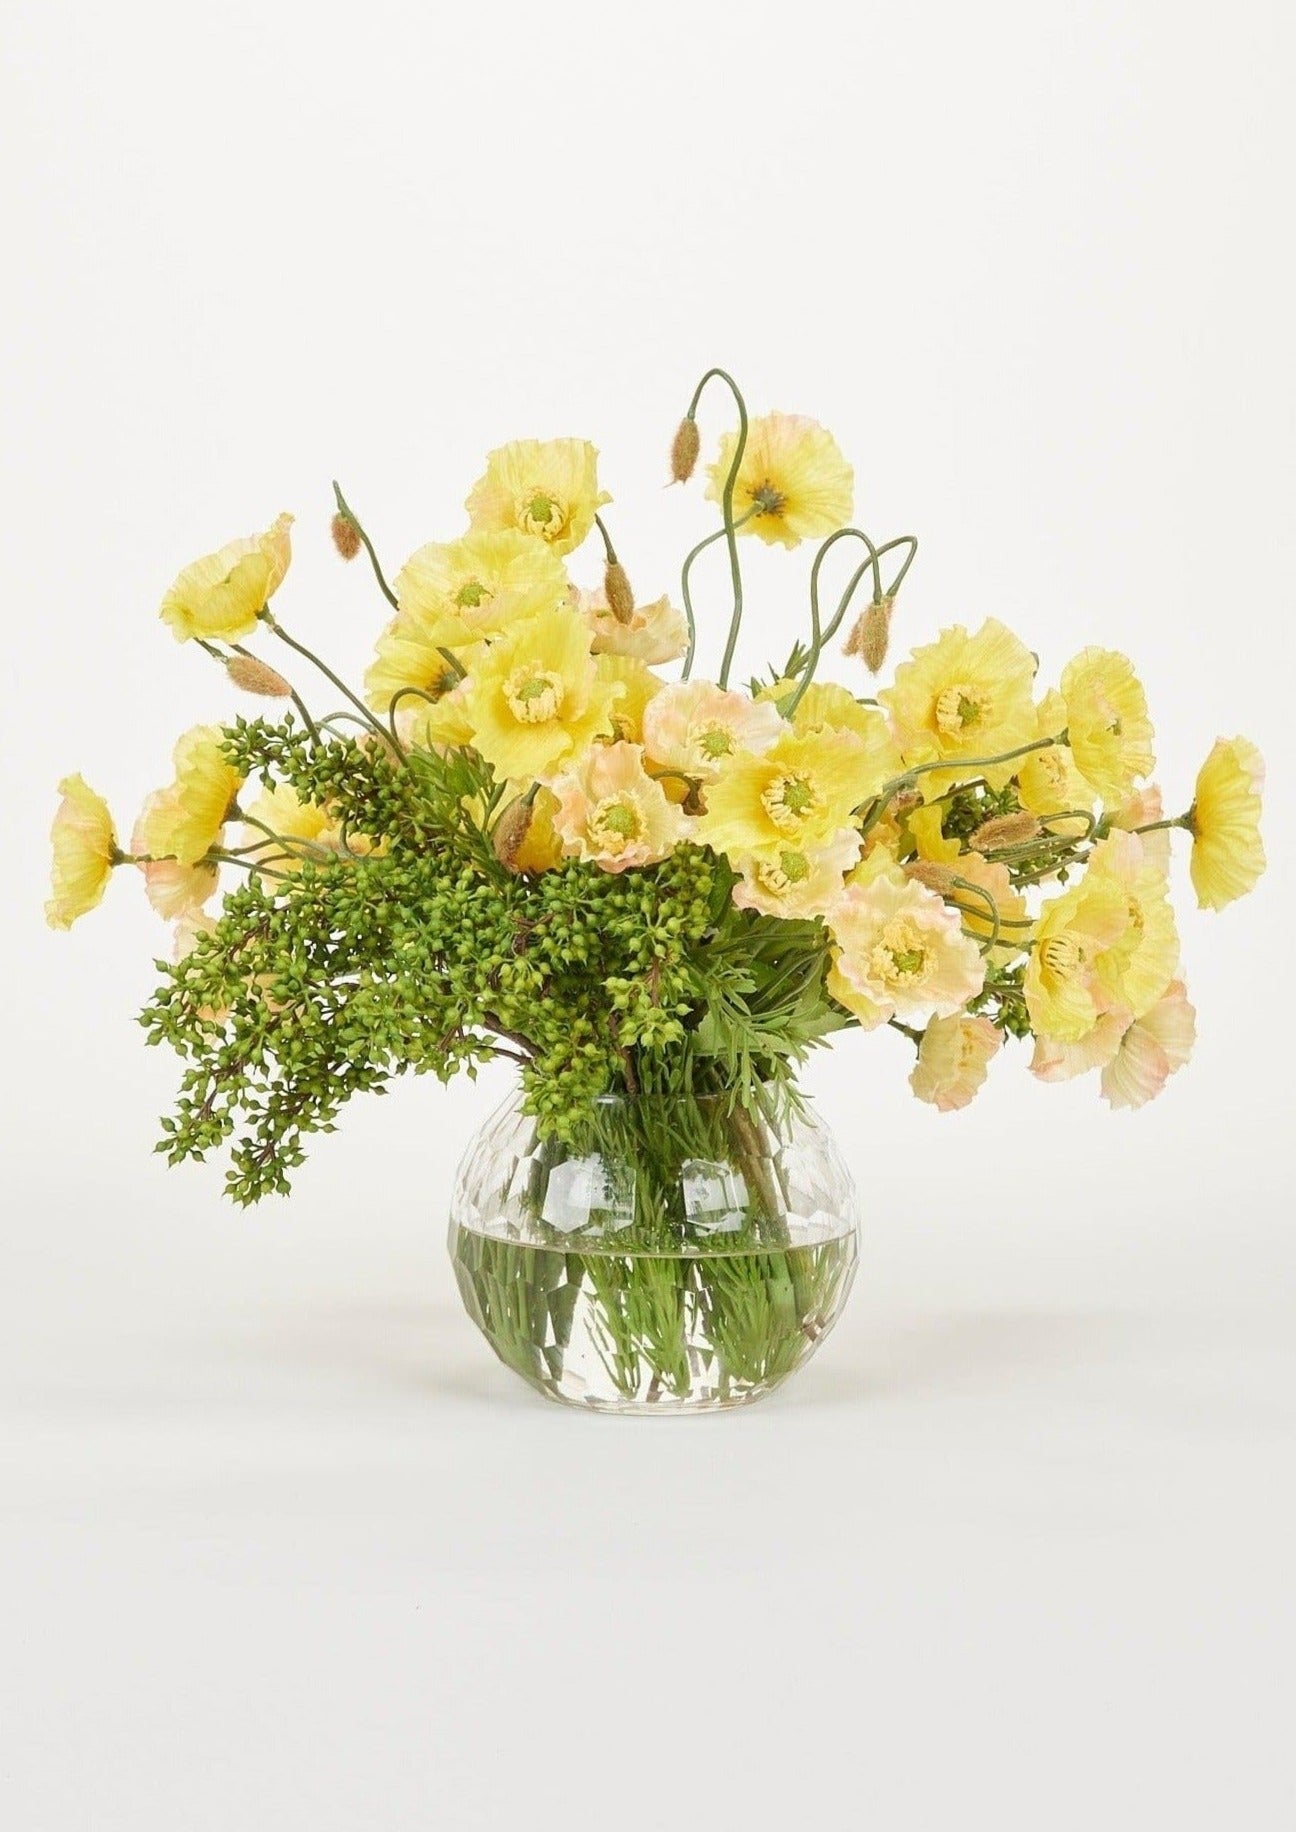 Faux Flower Arrangement of Yellow Poppies in Glass Vase